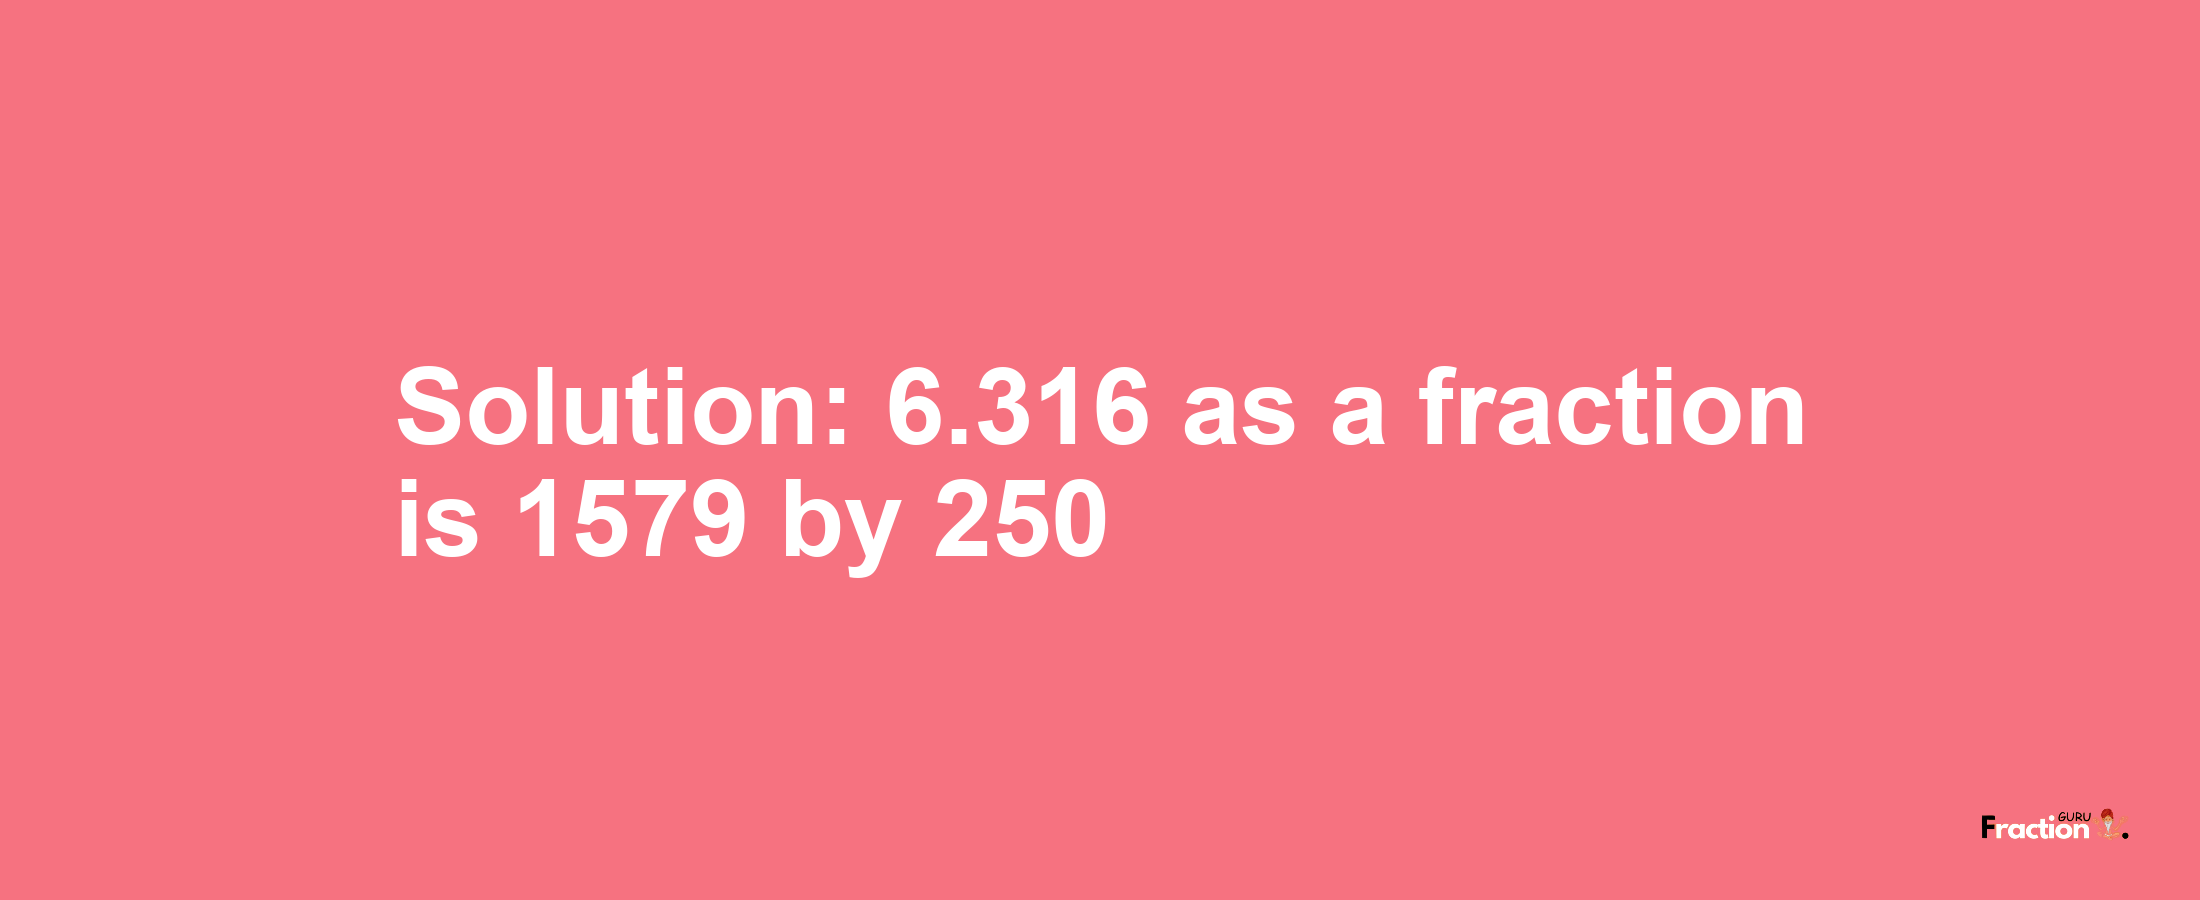 Solution:6.316 as a fraction is 1579/250